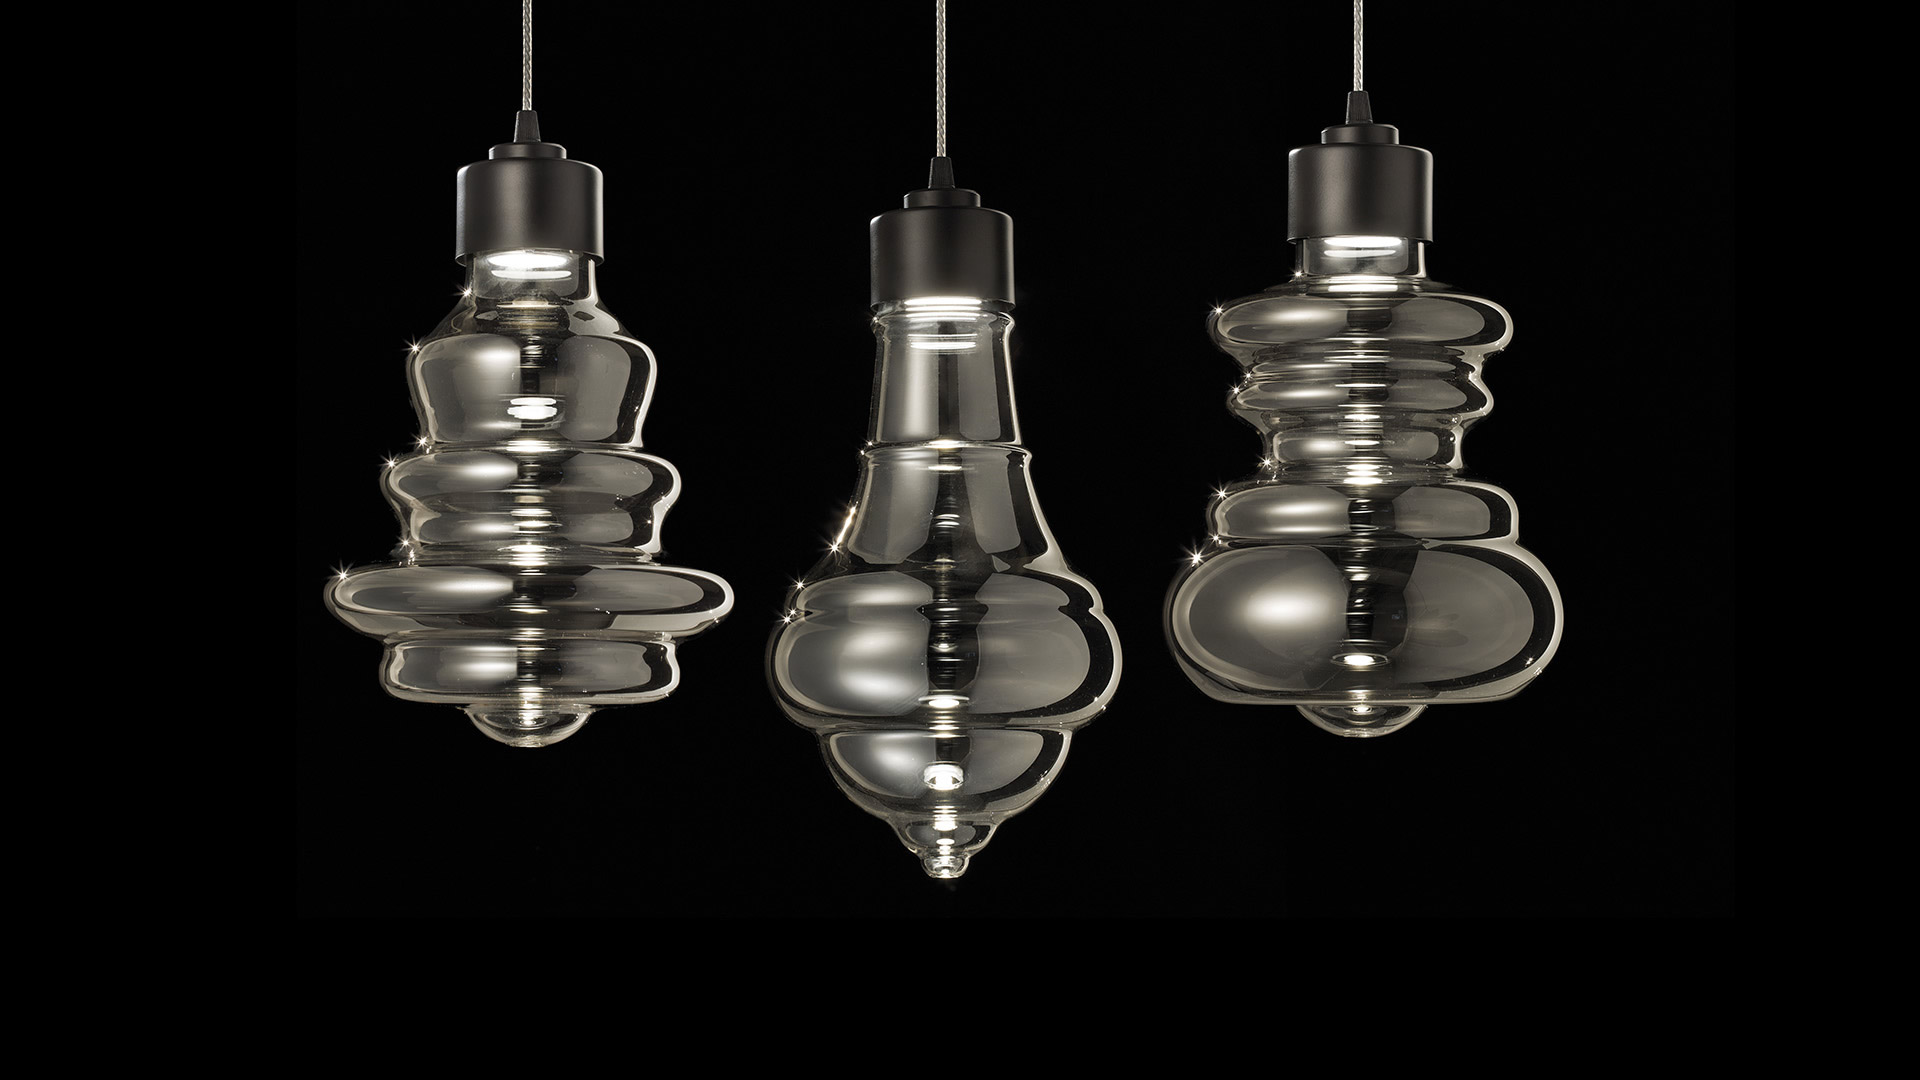 Evistyle Trottola Lighting Collection